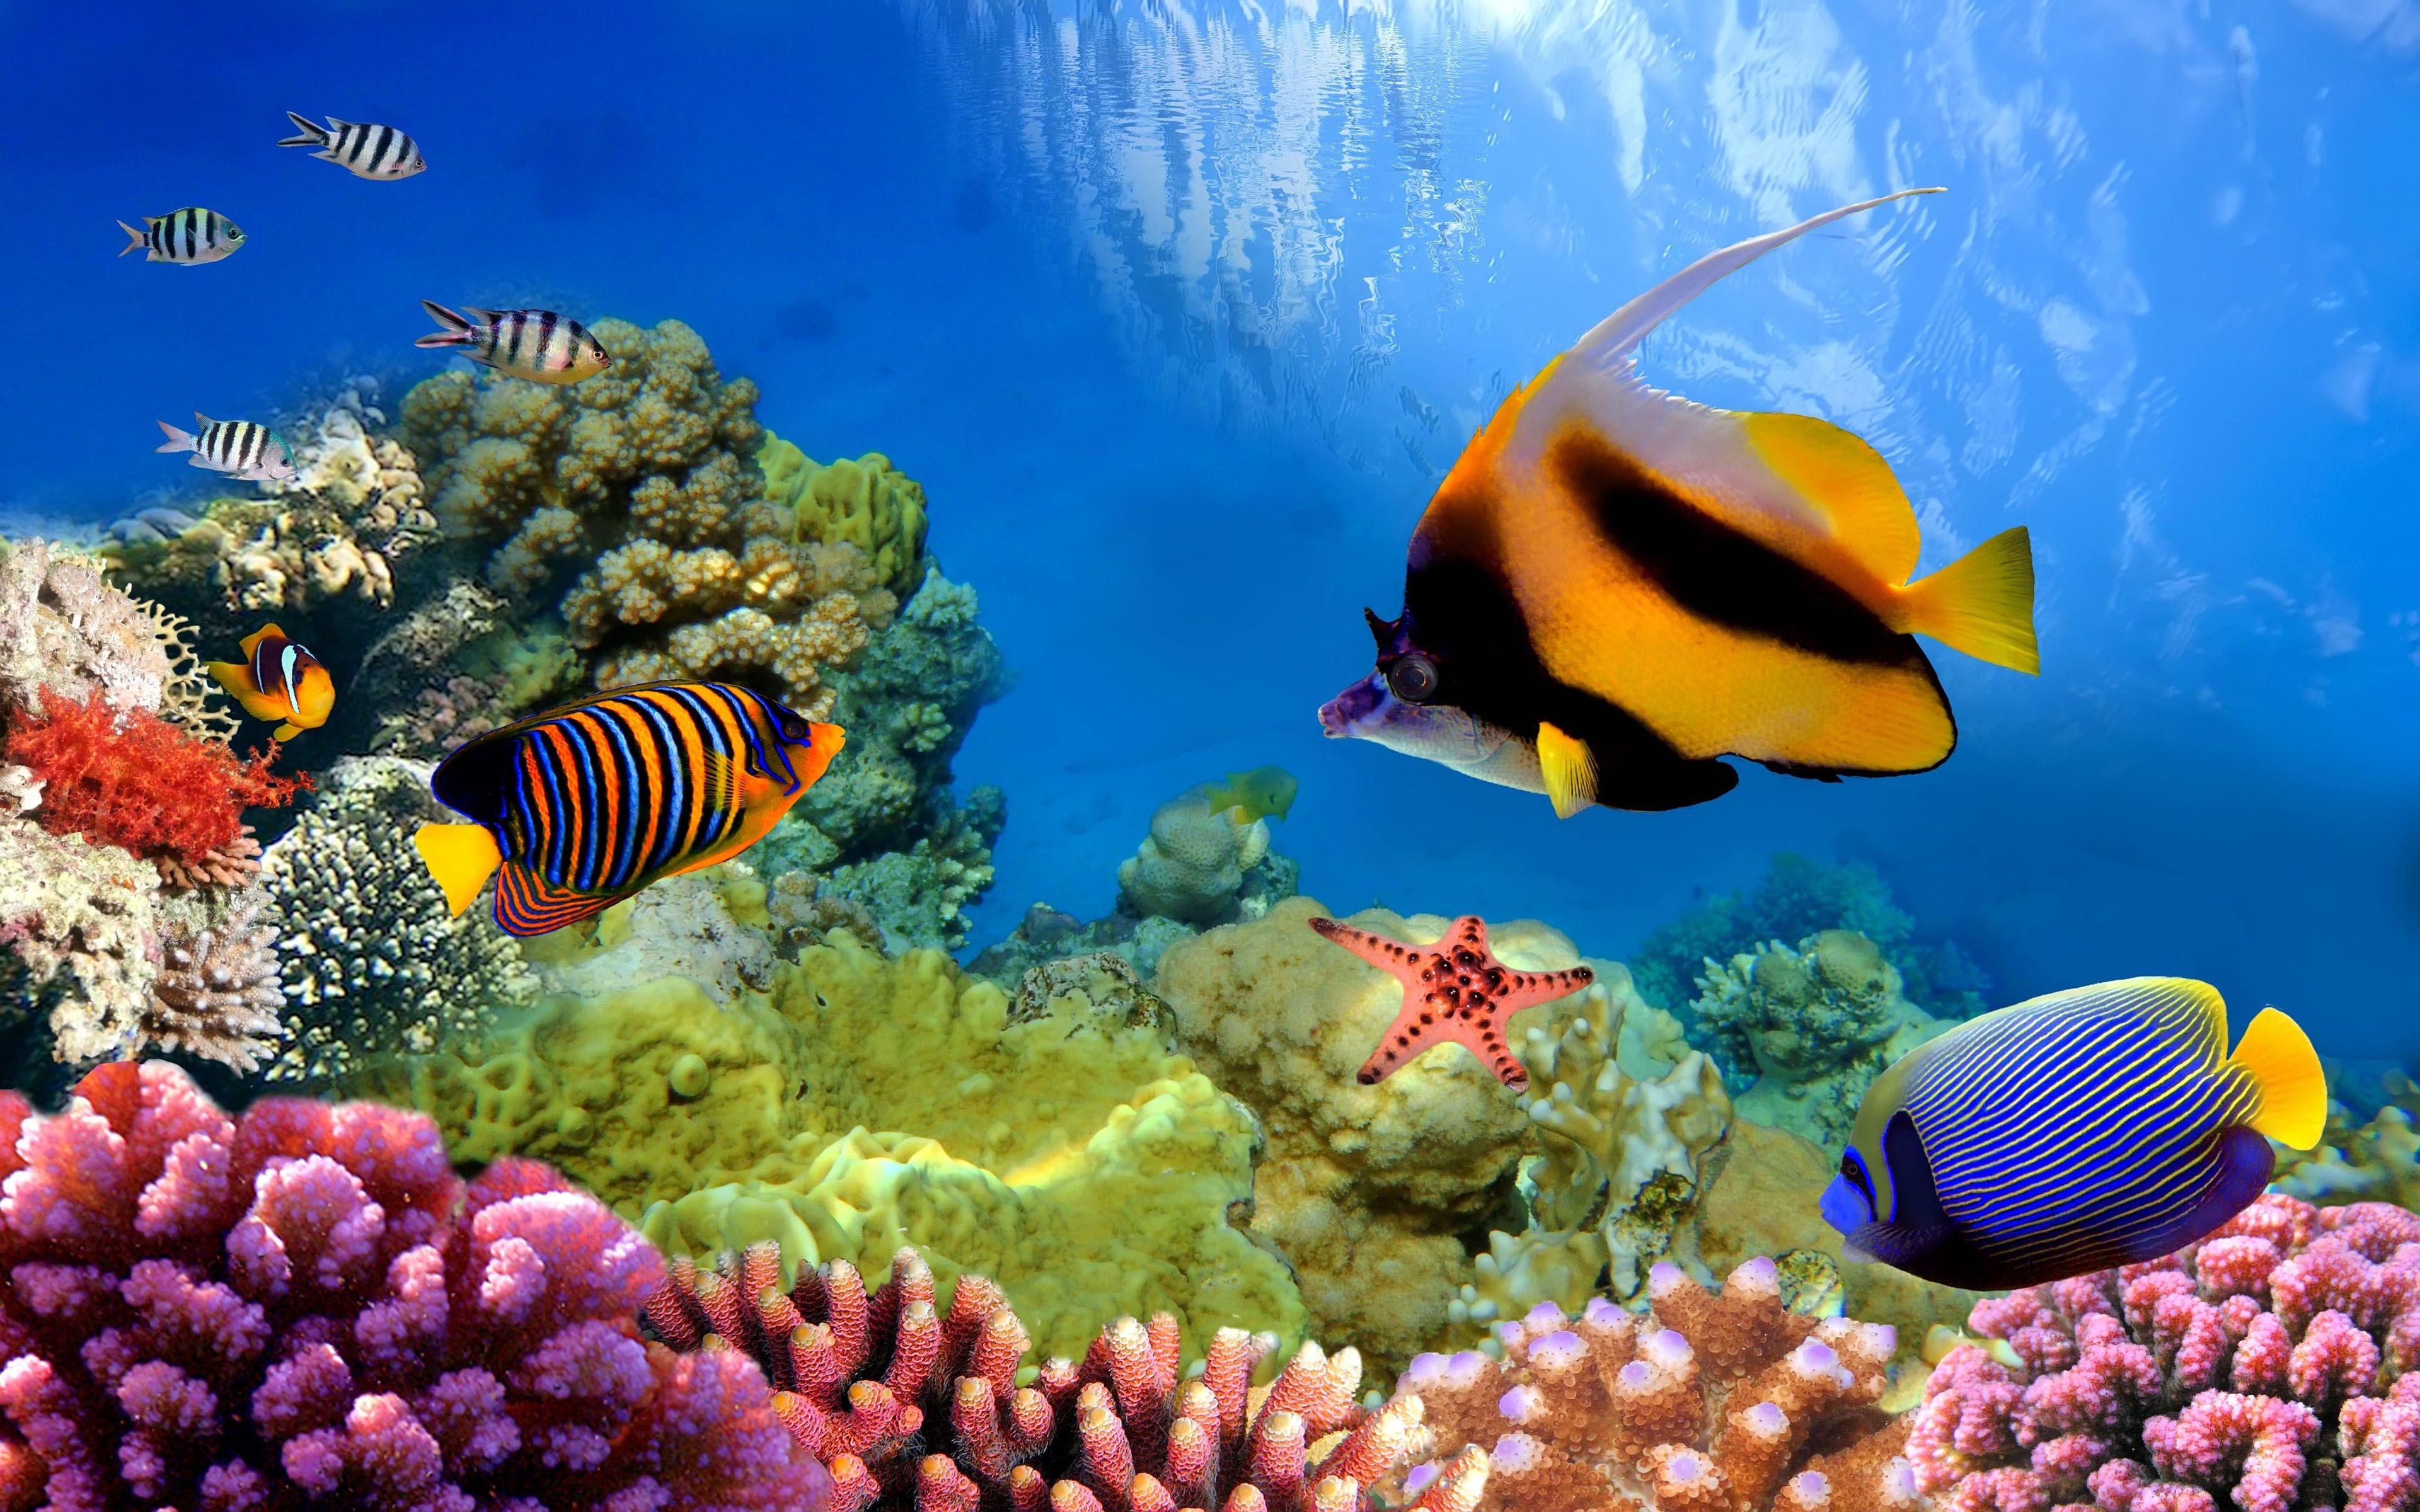 Real Coral Reef 4K Wallpapers - Top Free Real Coral Reef 4K Backgrounds